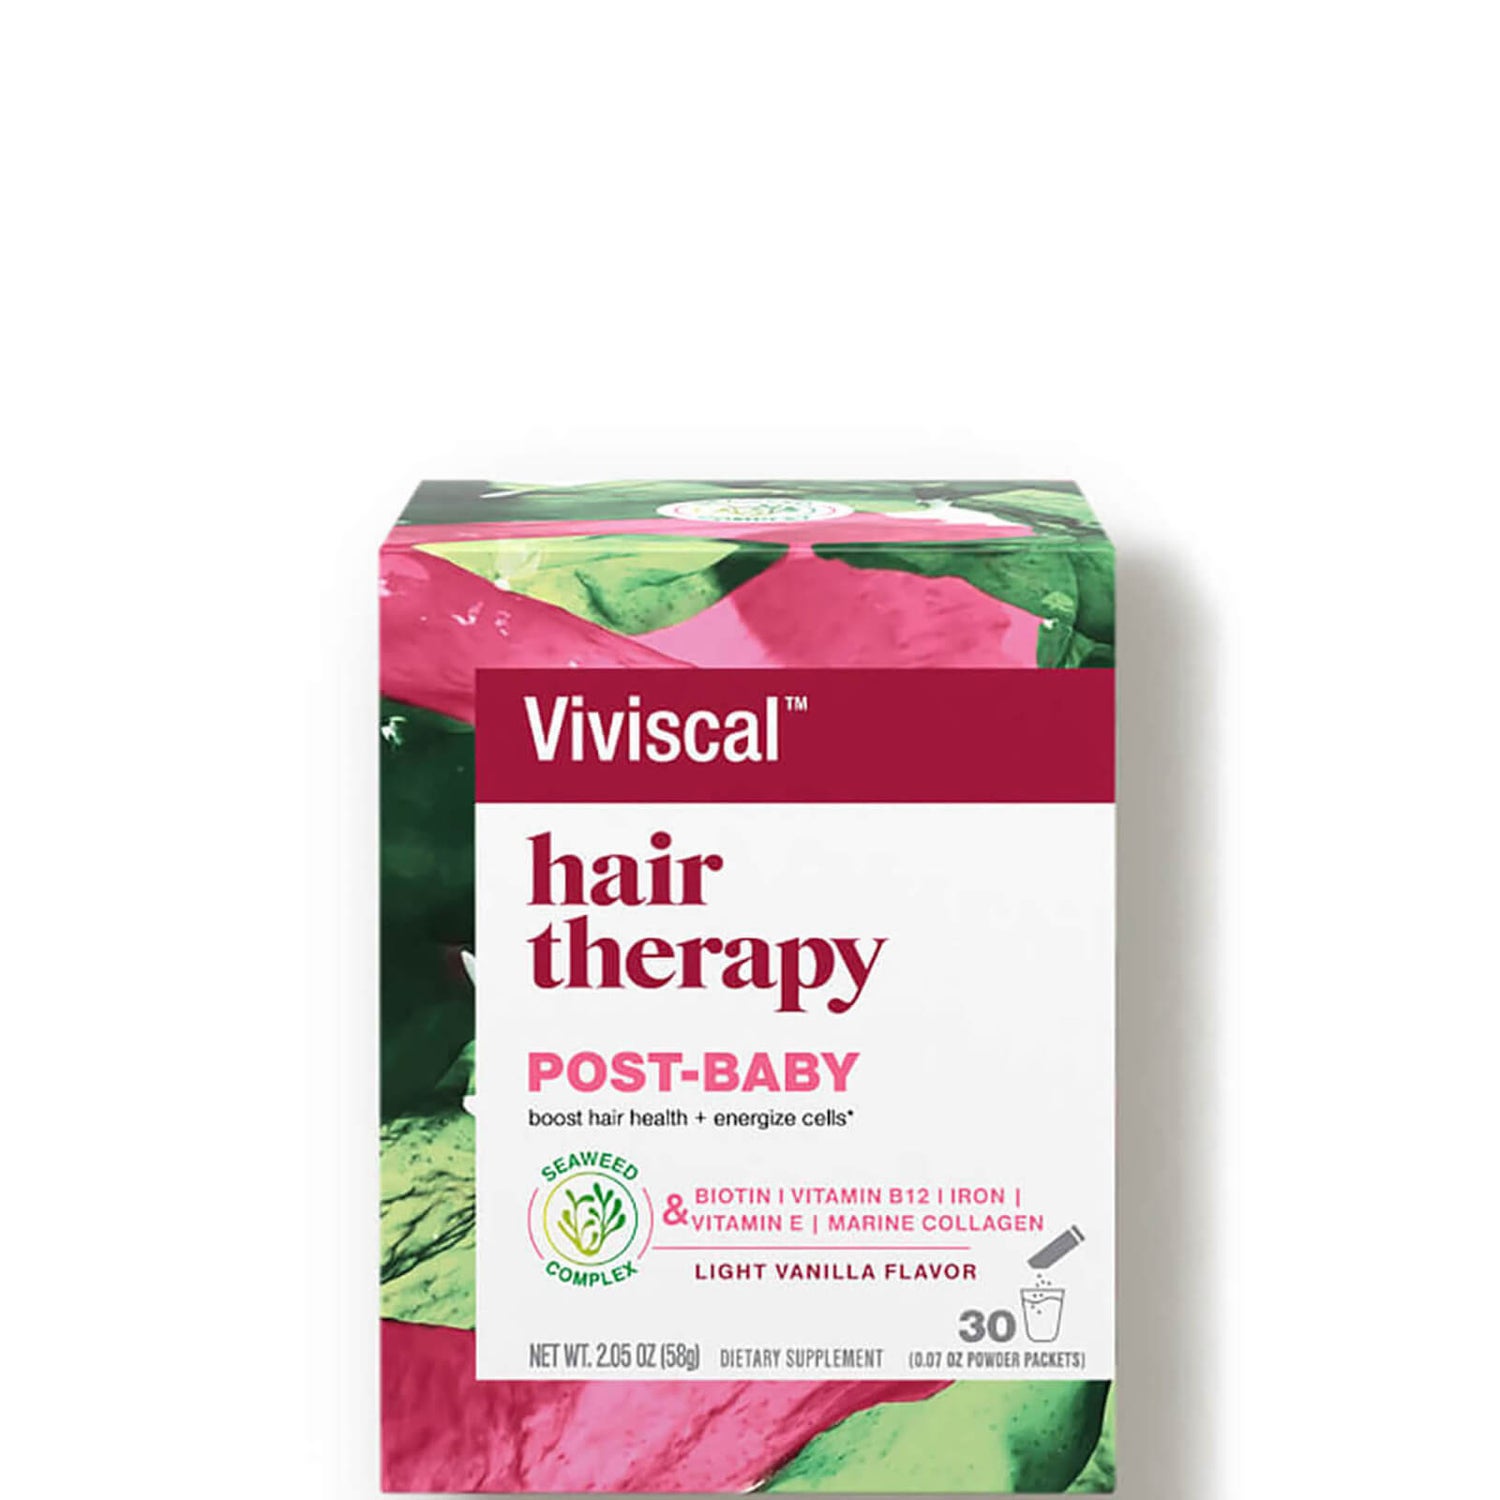 Viviscal Hair Therapy Post Baby (30 count)